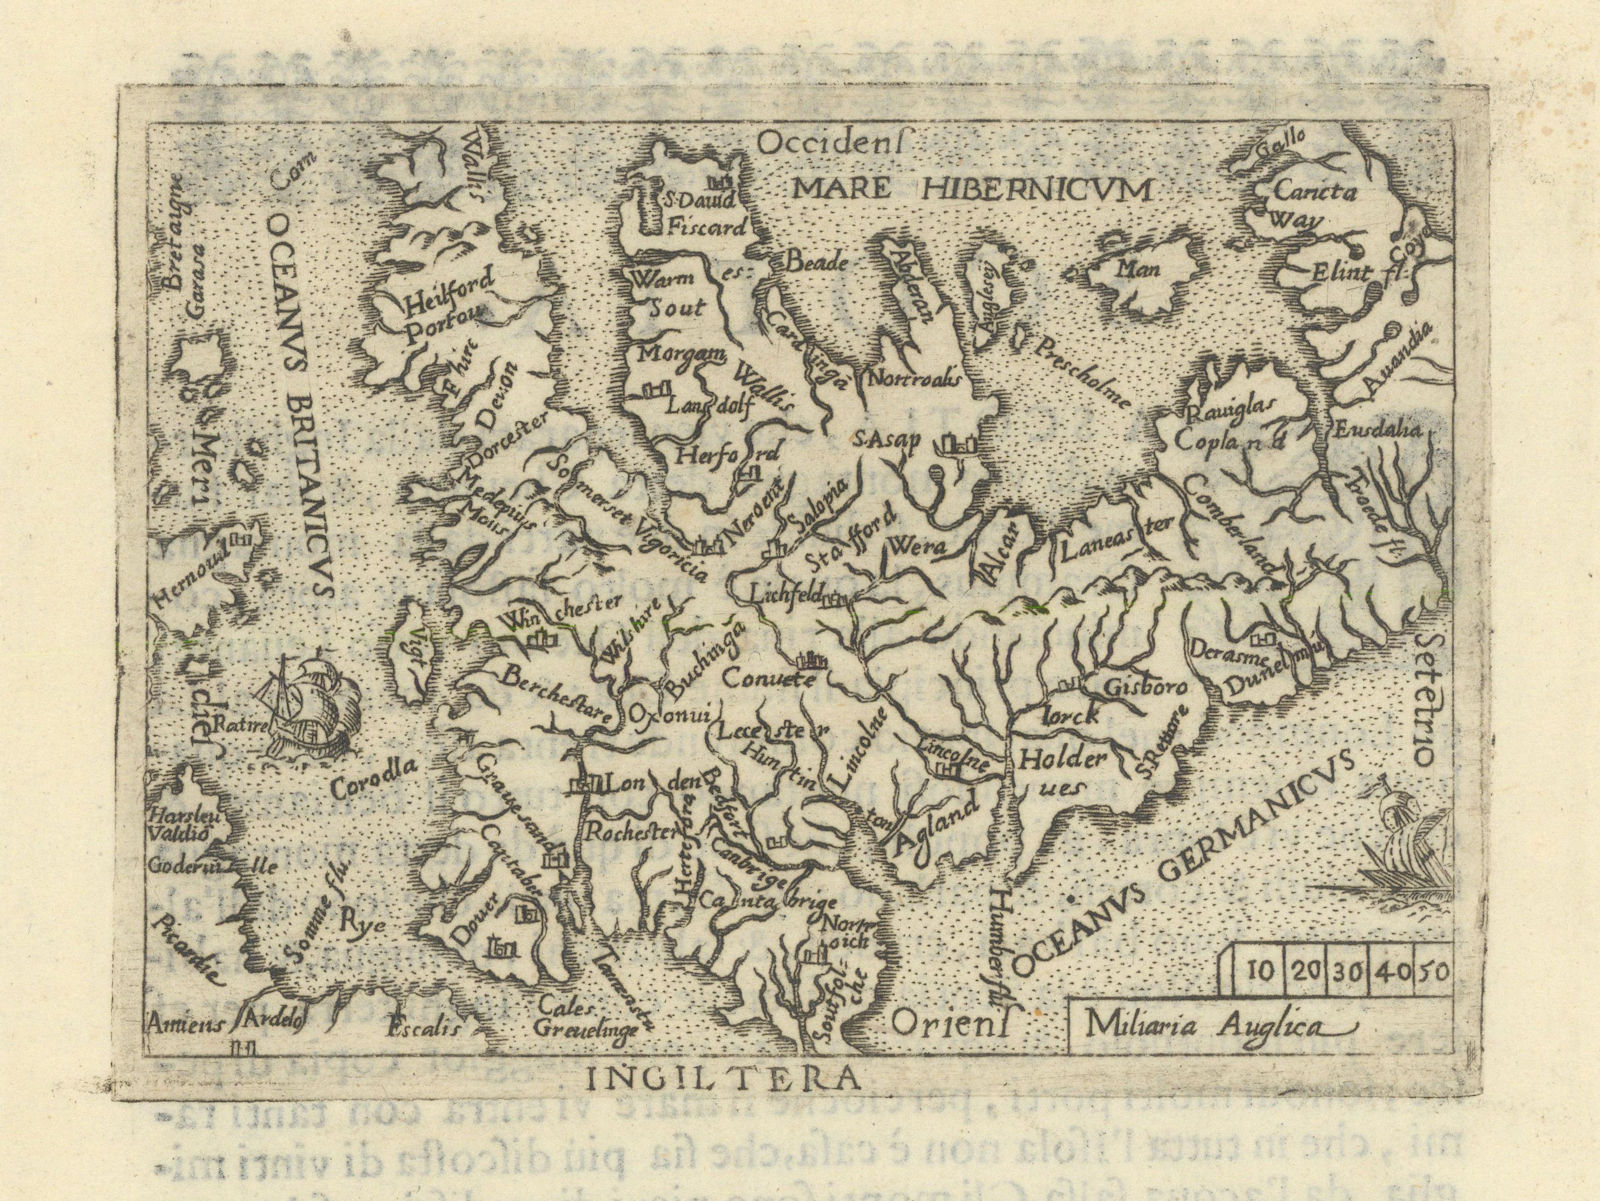 Associate Product Ingiltera by Pietro Maria Marchetti after Ortelius/Galle. Great Britain 1598 map